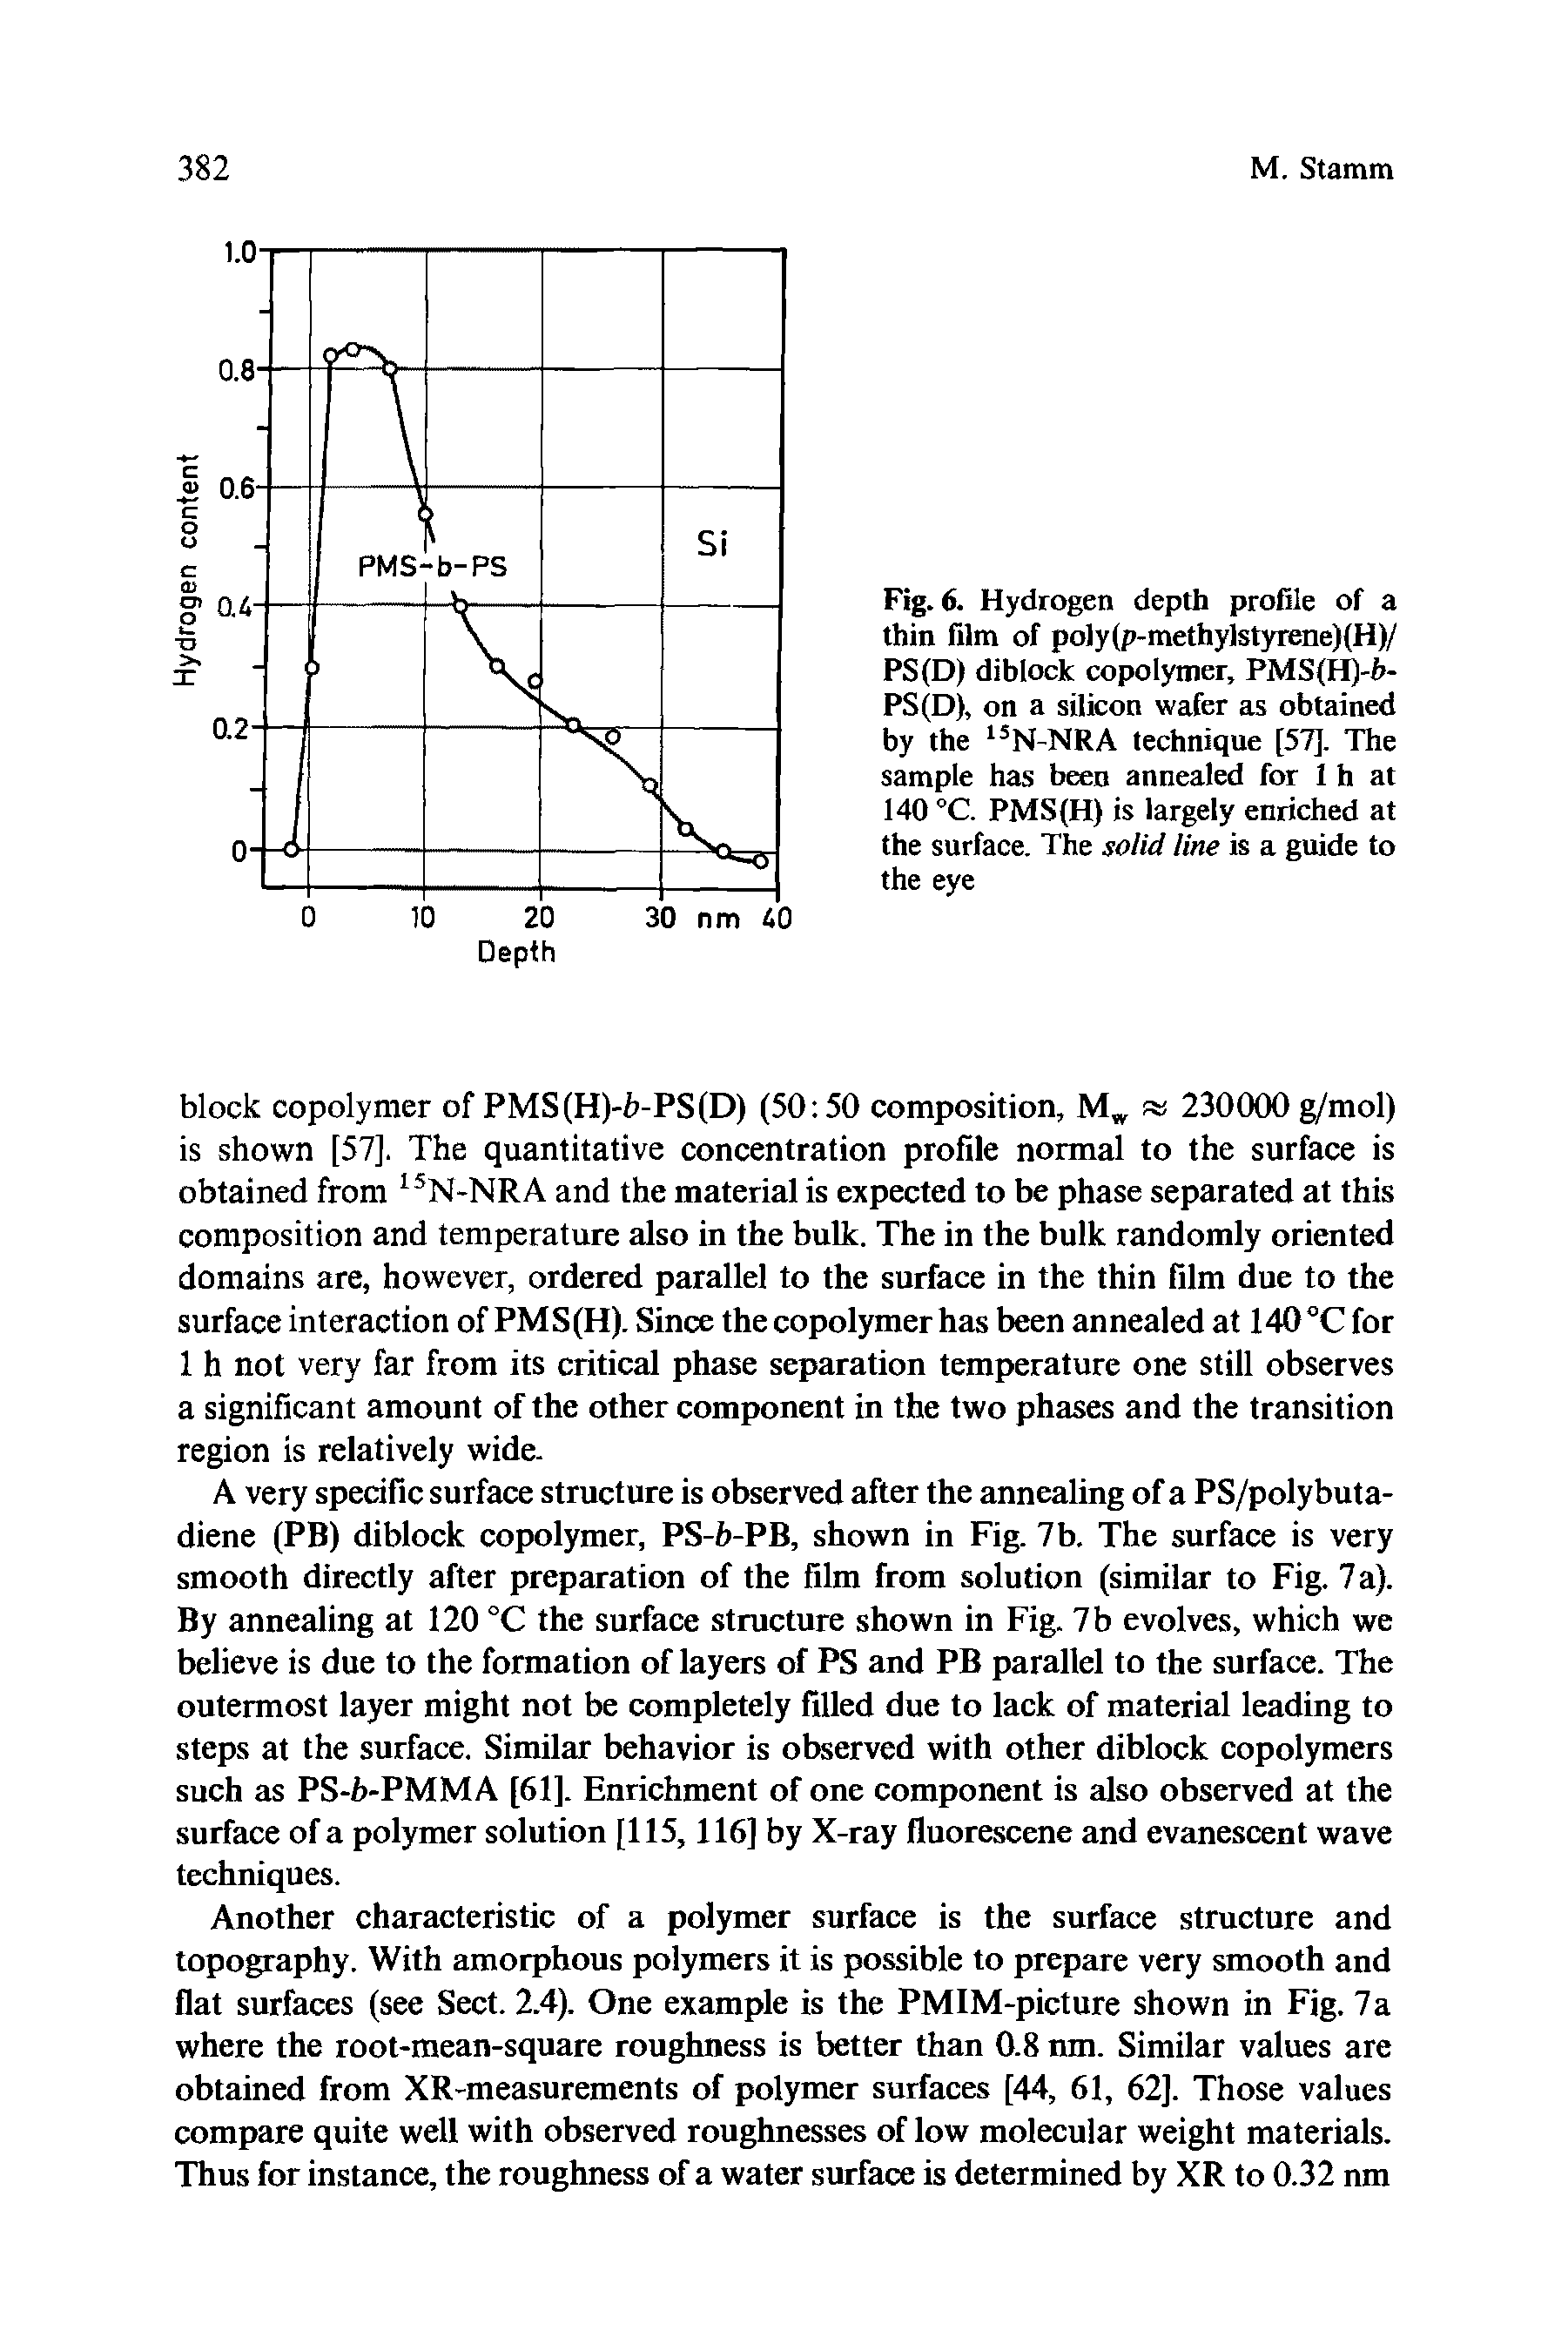 Fig. 6. Hydrogen depth profile of a thin film of poly(p-methylstyrene)(H)/ PS(D) diblock copolymer, PMS(H)-b-PS(D), on a silicon wafer as obtained by the l5N-NRA technique [57]. The sample has been annealed for 1 h at 140 °C. PMS(H) is largely enriched at the surface. The solid line is a guide to the eye...